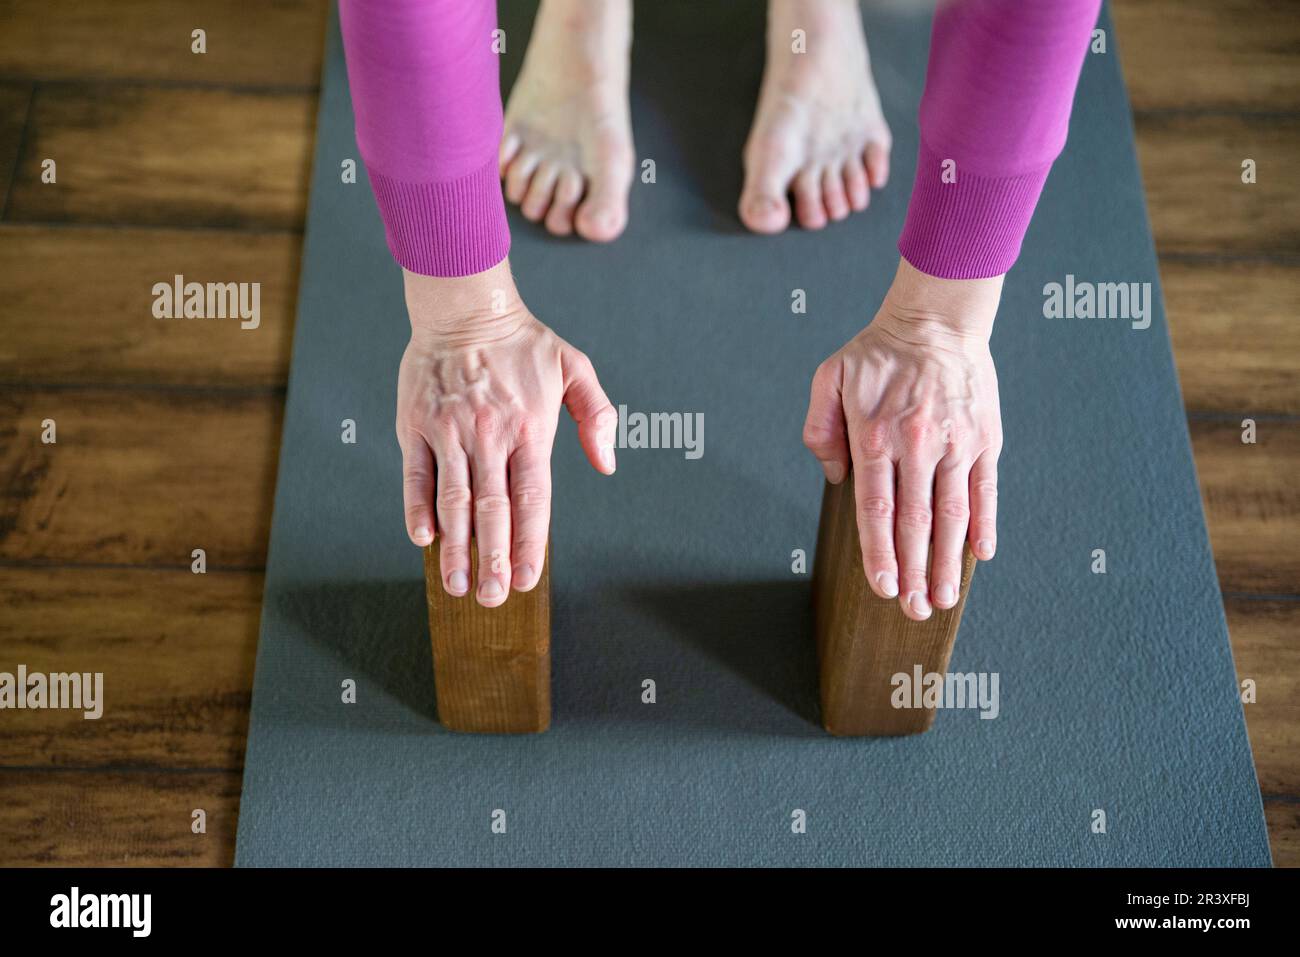 Women practicing yoga stretching using wooden blocks with hands ...